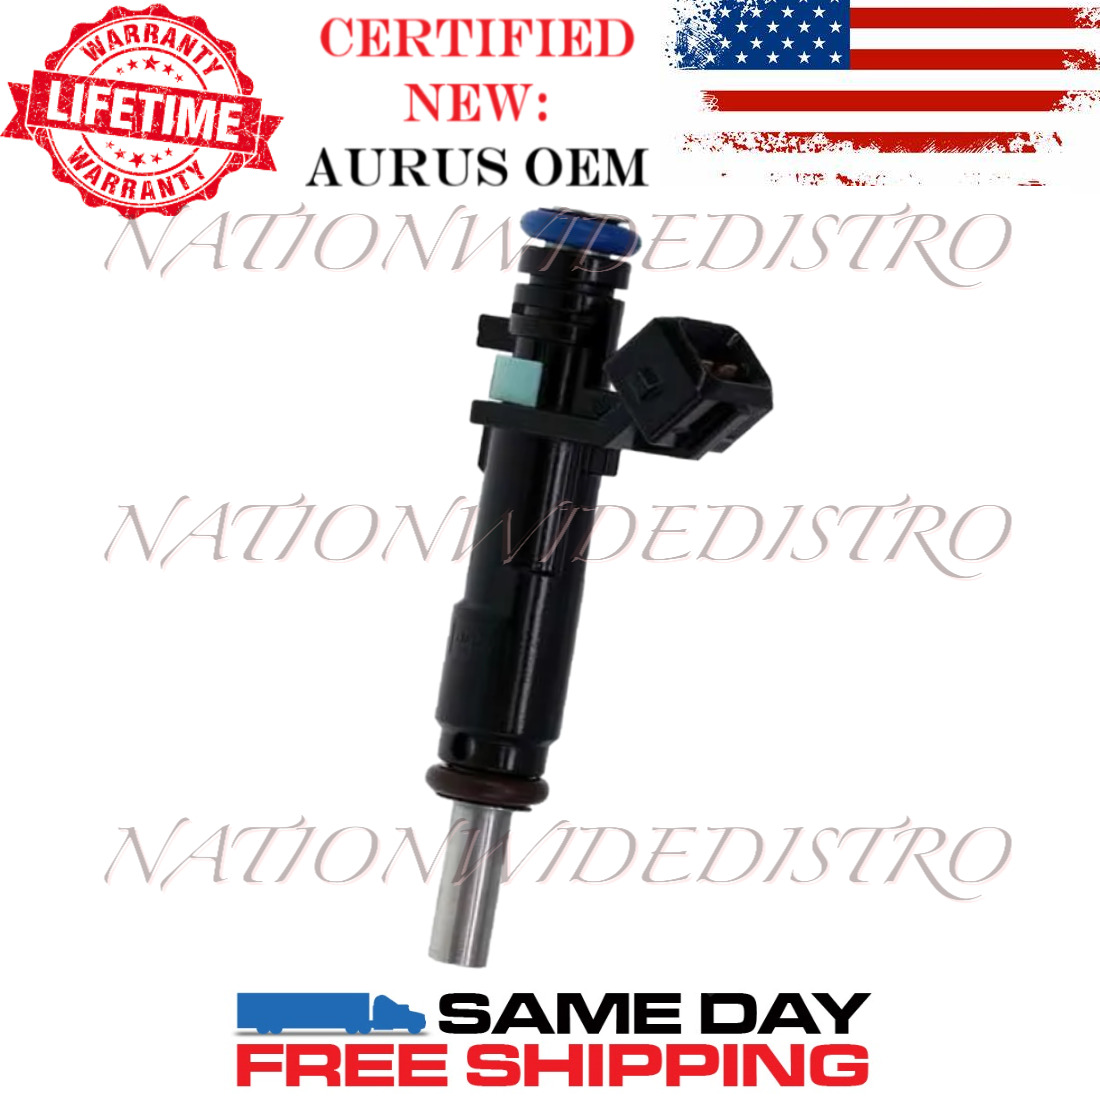 1x OEM NEW AURUS Fuel Injector for 2012-2018 Chevrolet Sonic 1.8L I4 55570284